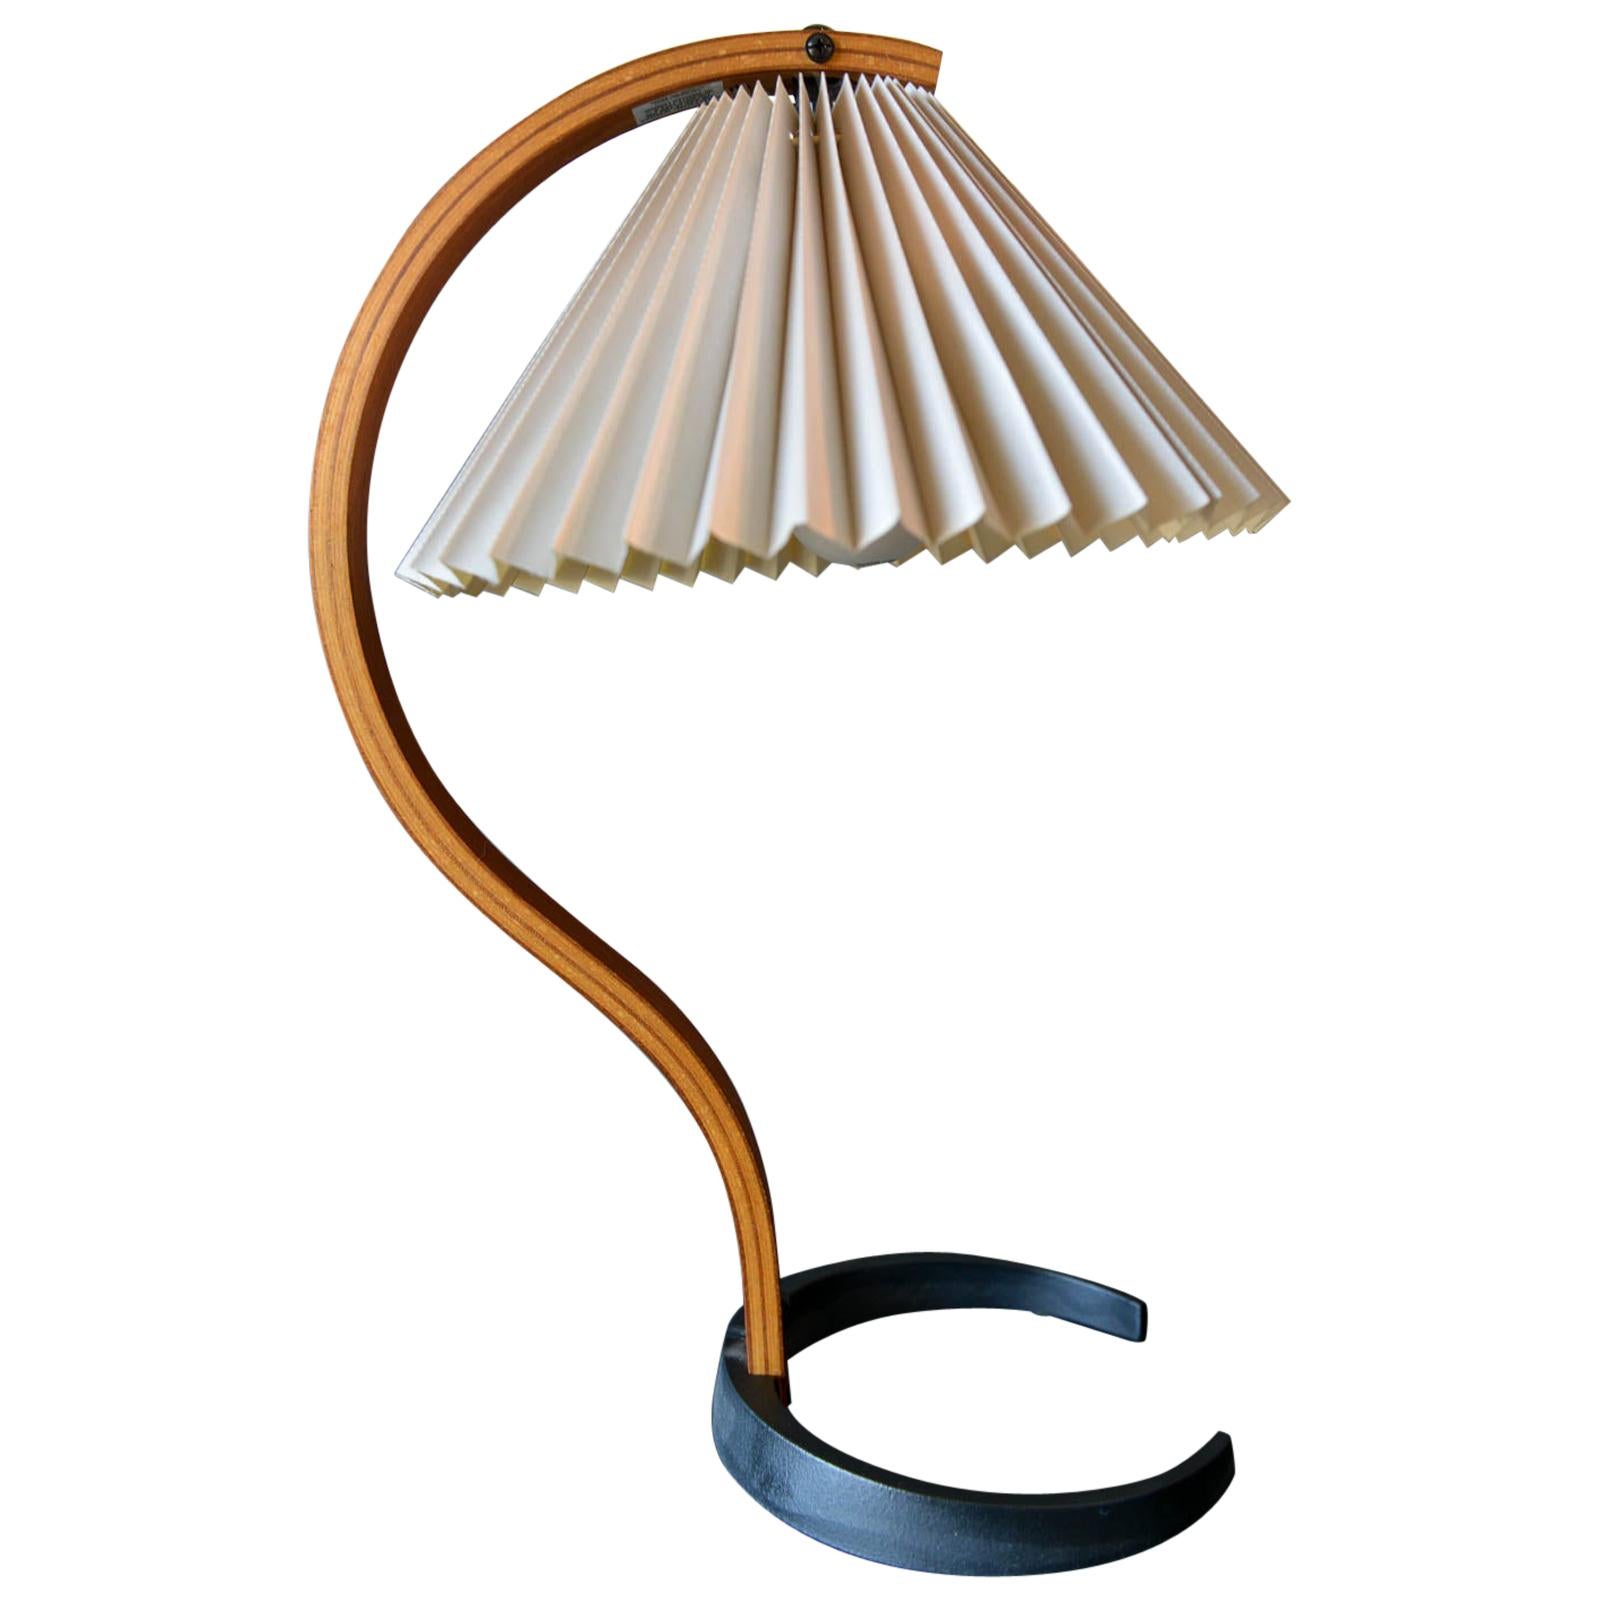 Bentwood Table Lamp by Caprani Light of Denmark, circa 1971